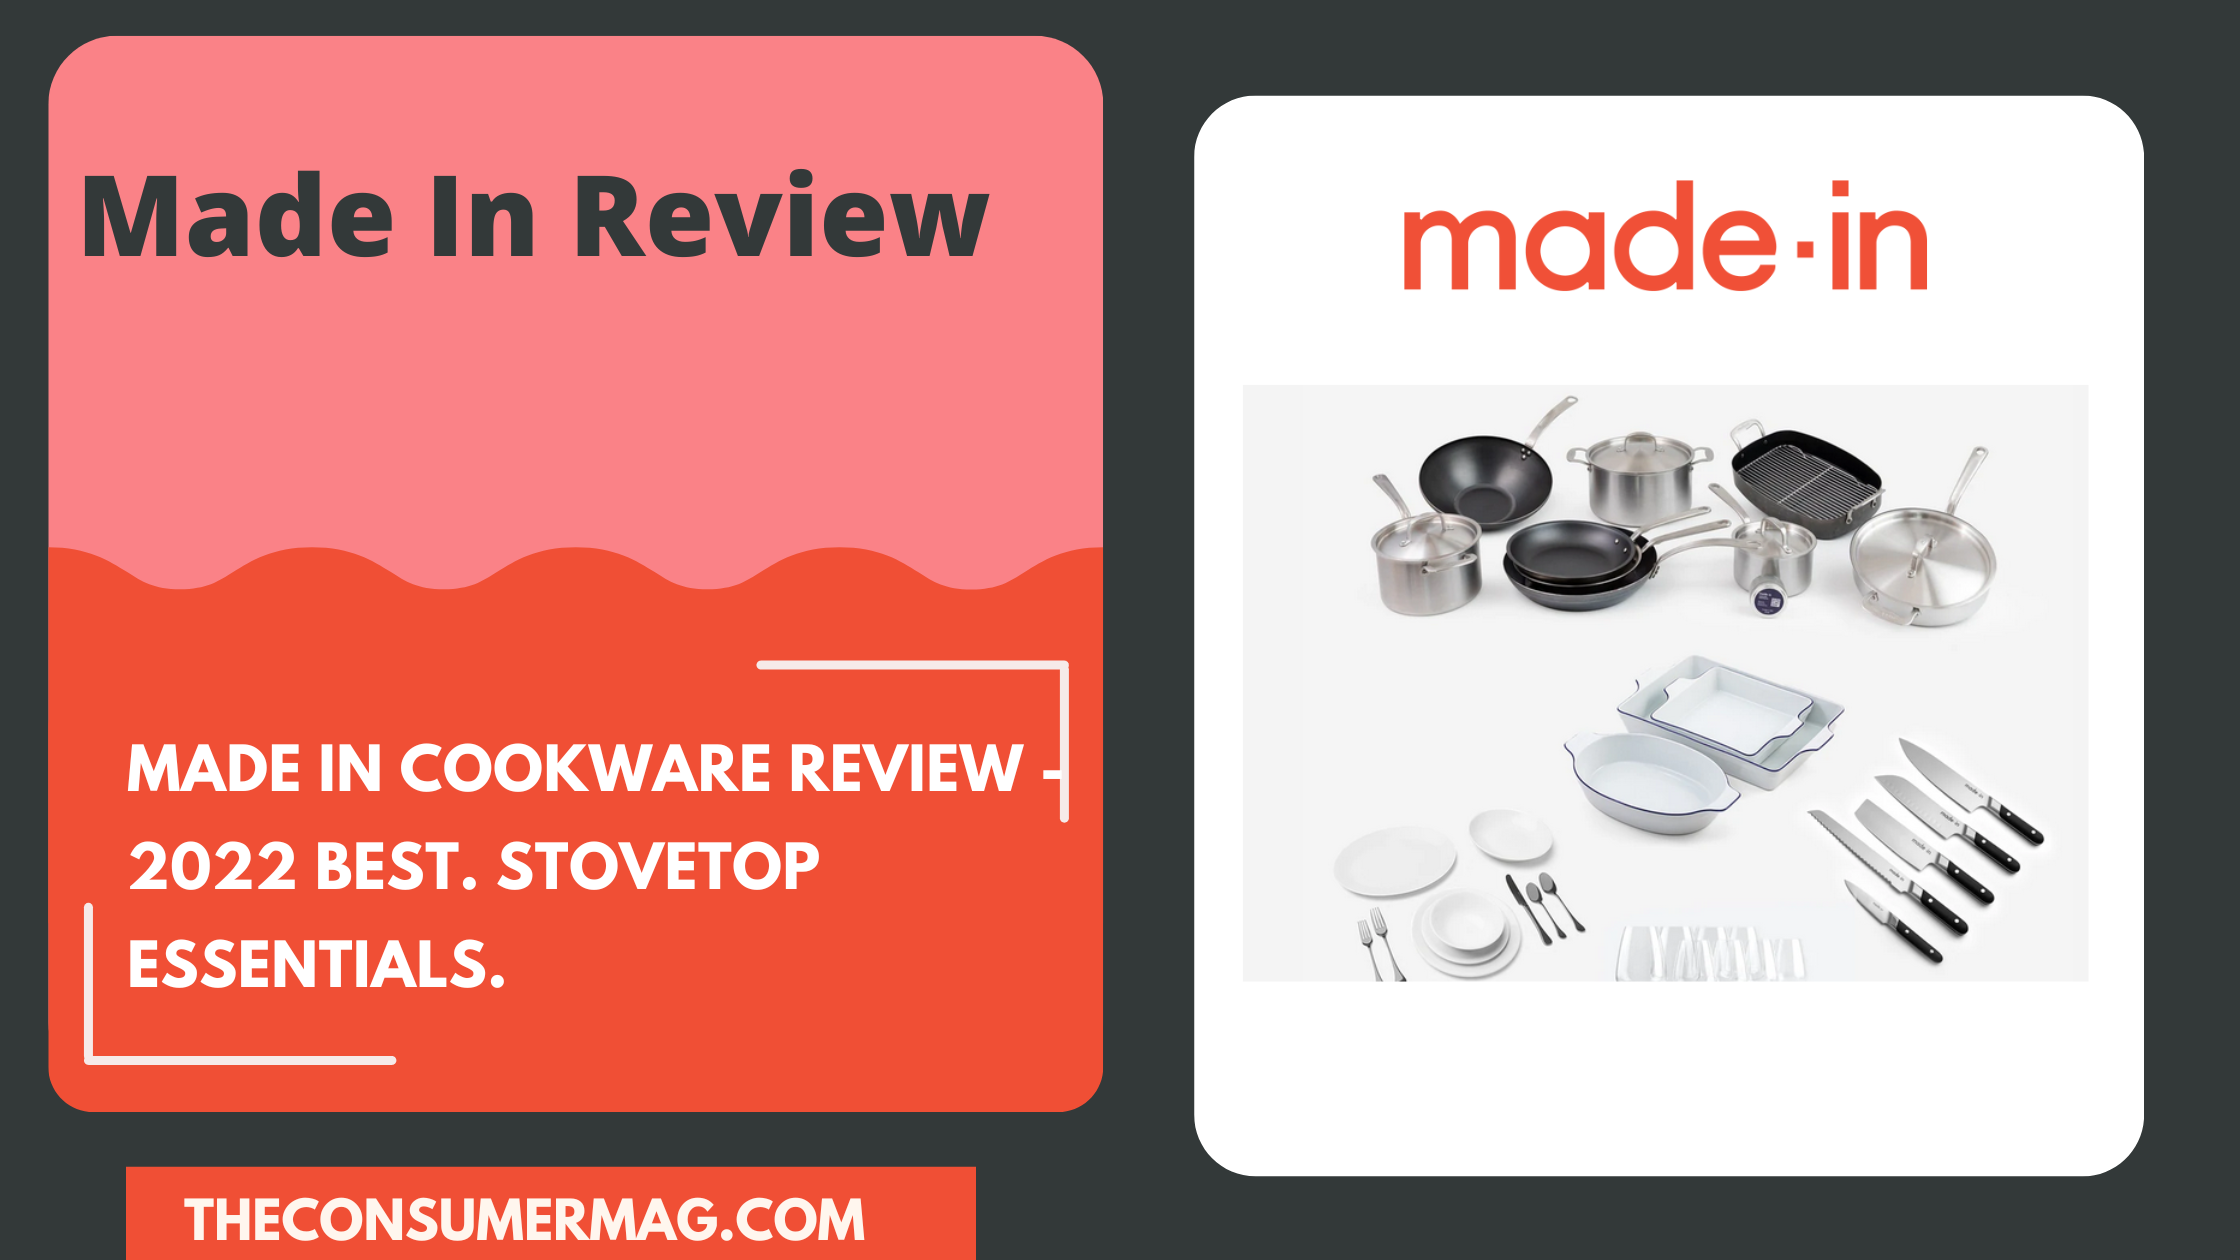 Made in Cookware featured image